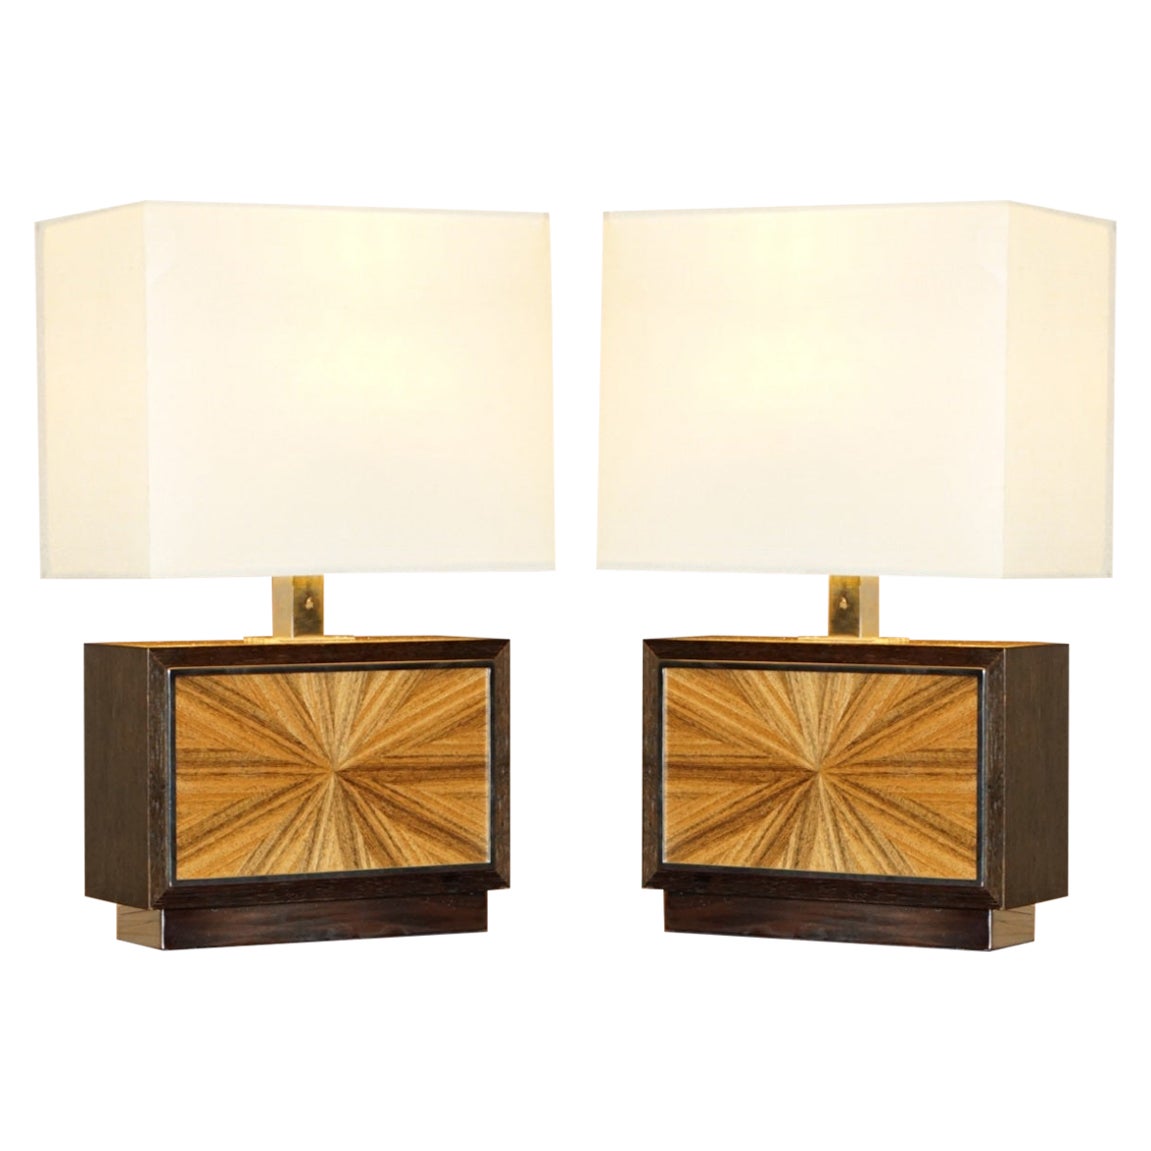 EXQUISITE PAIR OF DAVID LINLEY CHELSEA TABLE LAMPS WITH DIMMER SWITCHEs